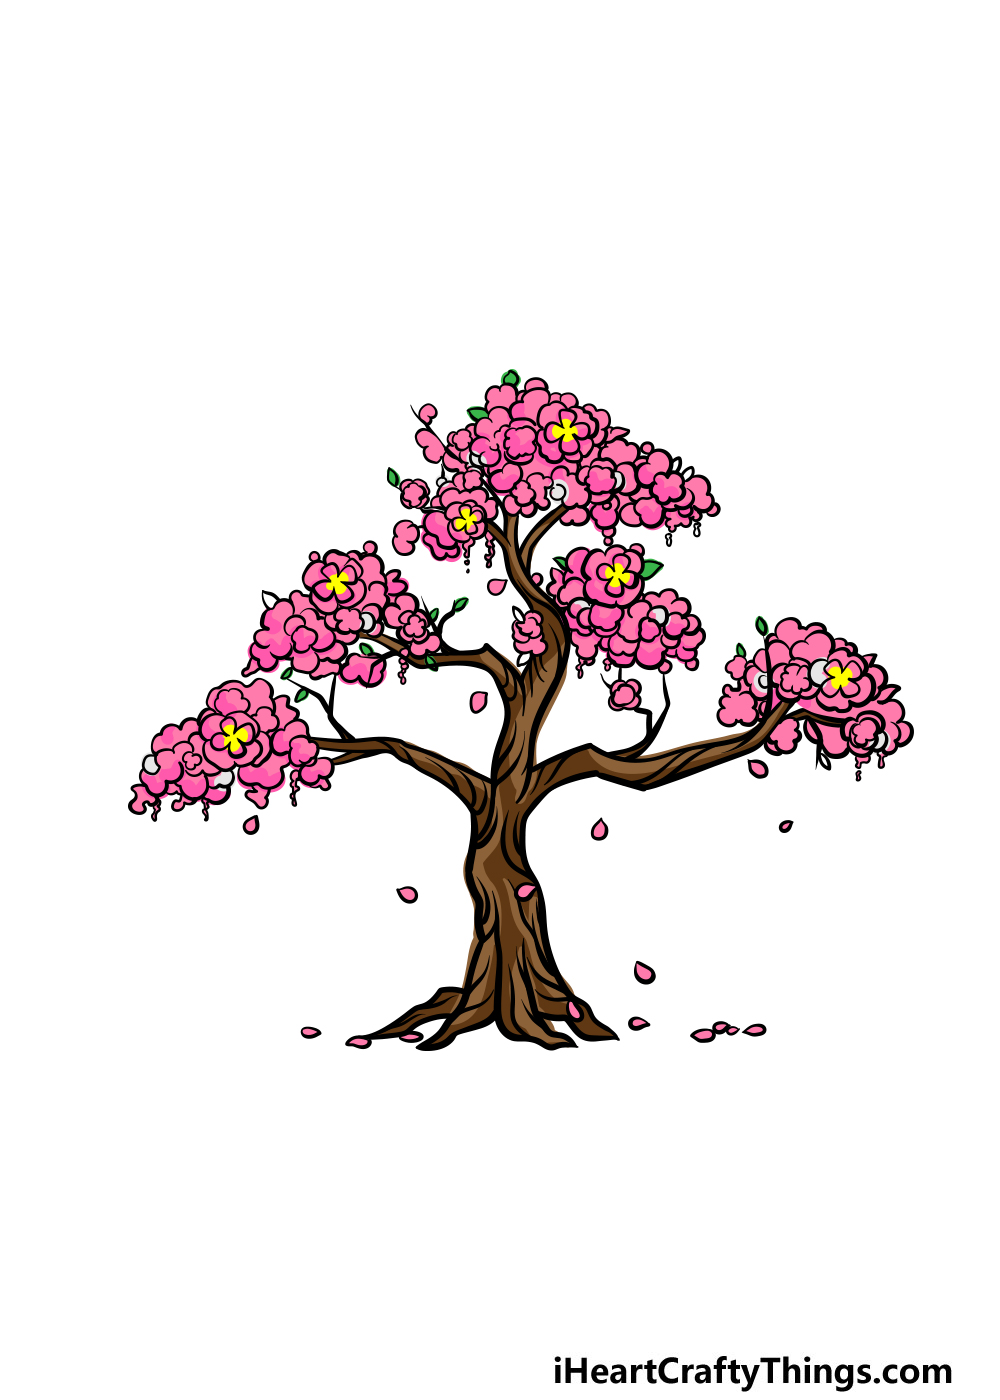 How to Draw a Cherry Blossom Tree